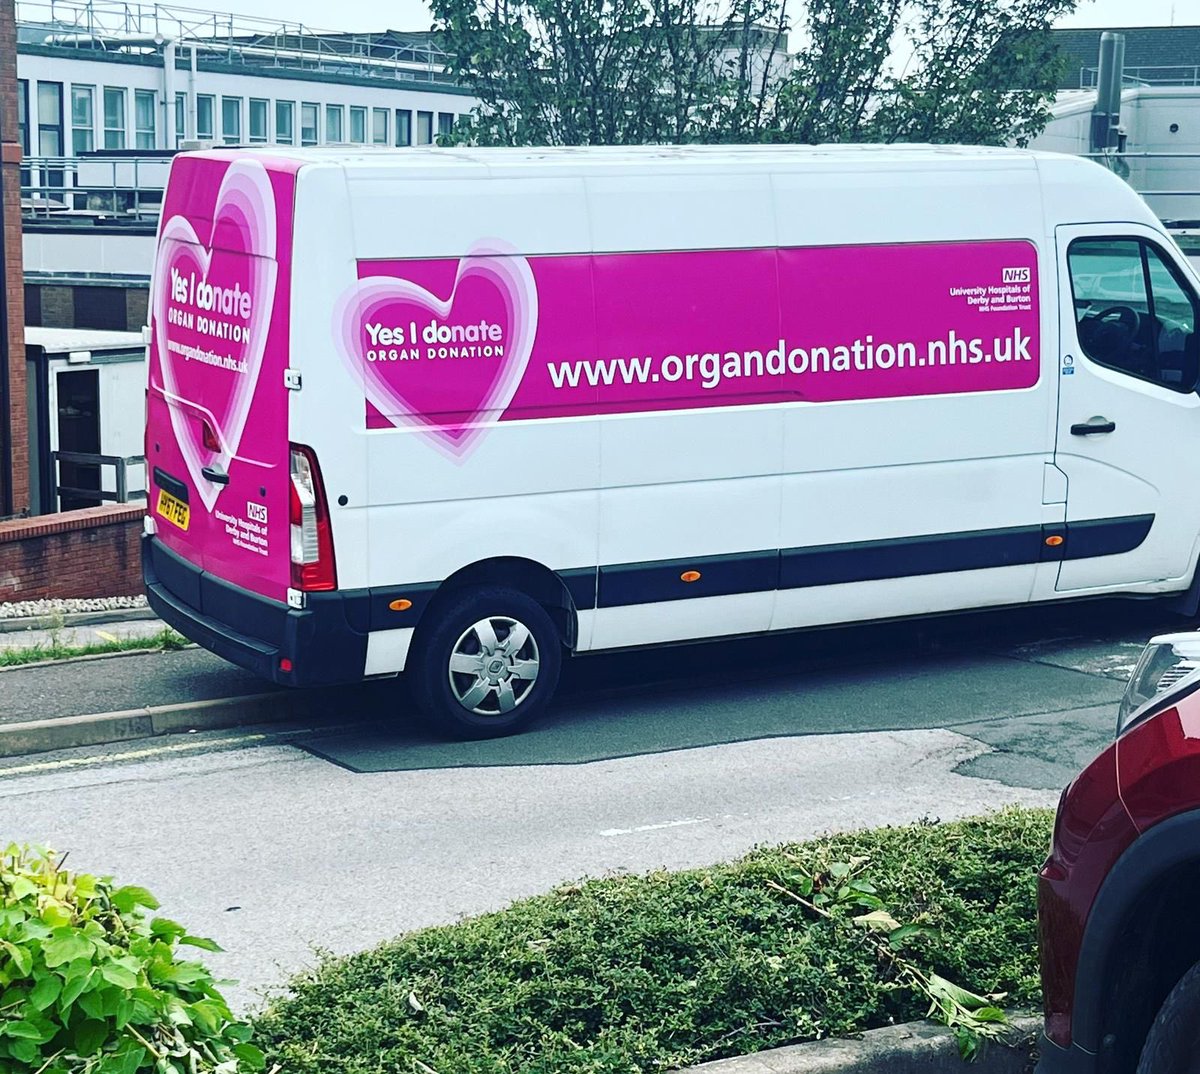 Our colleagues at @UHDBTrust are ‘driving’ promotion of #organdonation by spreading the word in their estate vans. They’re looking amazing! Talk to your family today about giving the gift of life #letstalkaboutit #giftoflife @NHSBT @NHSOrganDonor @MidlandsOrgan #shareyourwishes